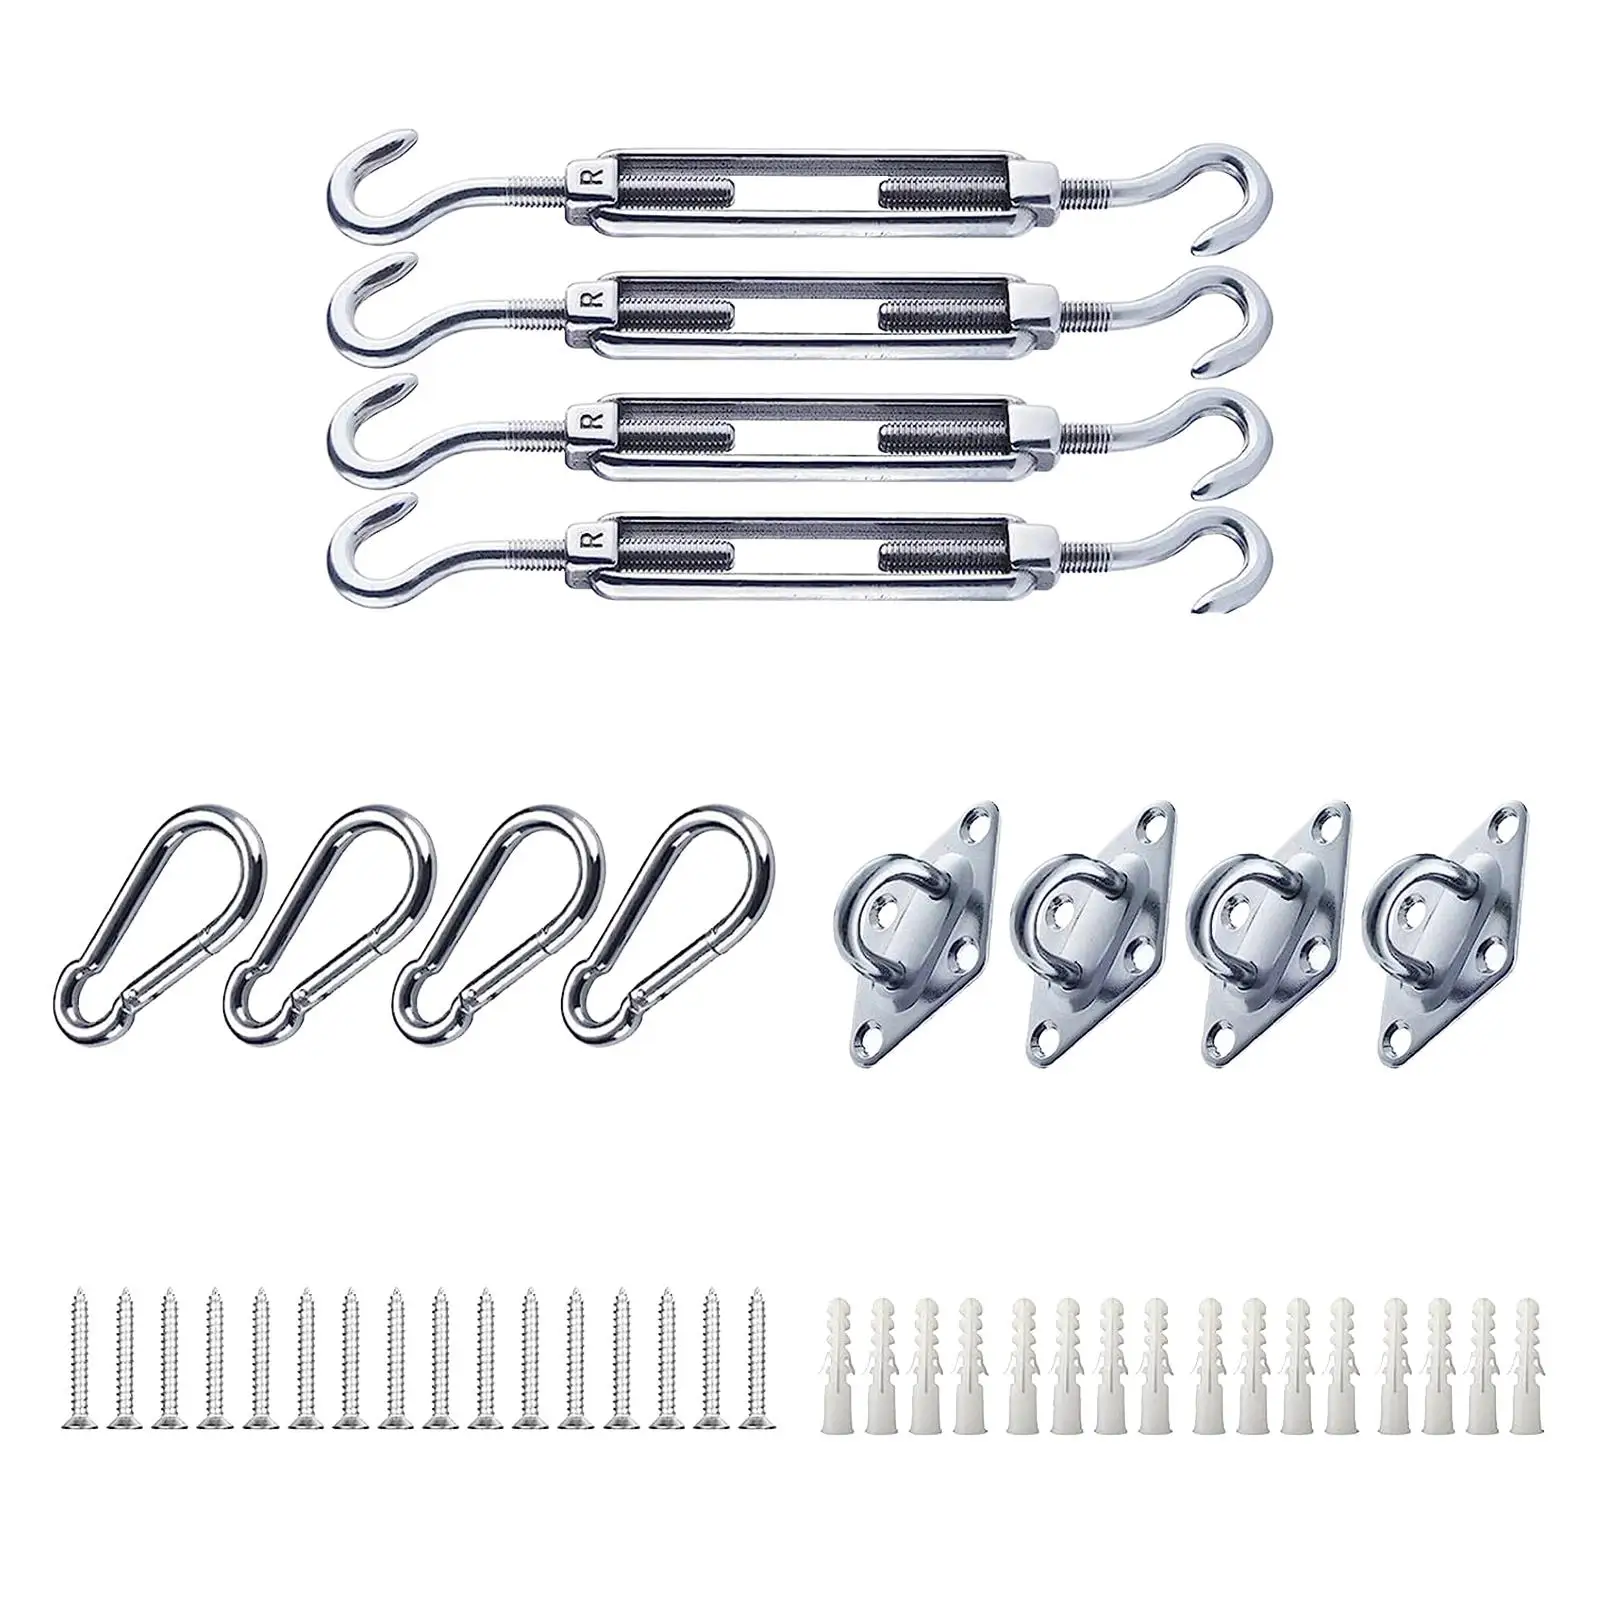 Canopy Installation Kits Stainless Steel Metal Sail Shade Hardware Kits Awning Attachment Set for Deck Lawn Patio